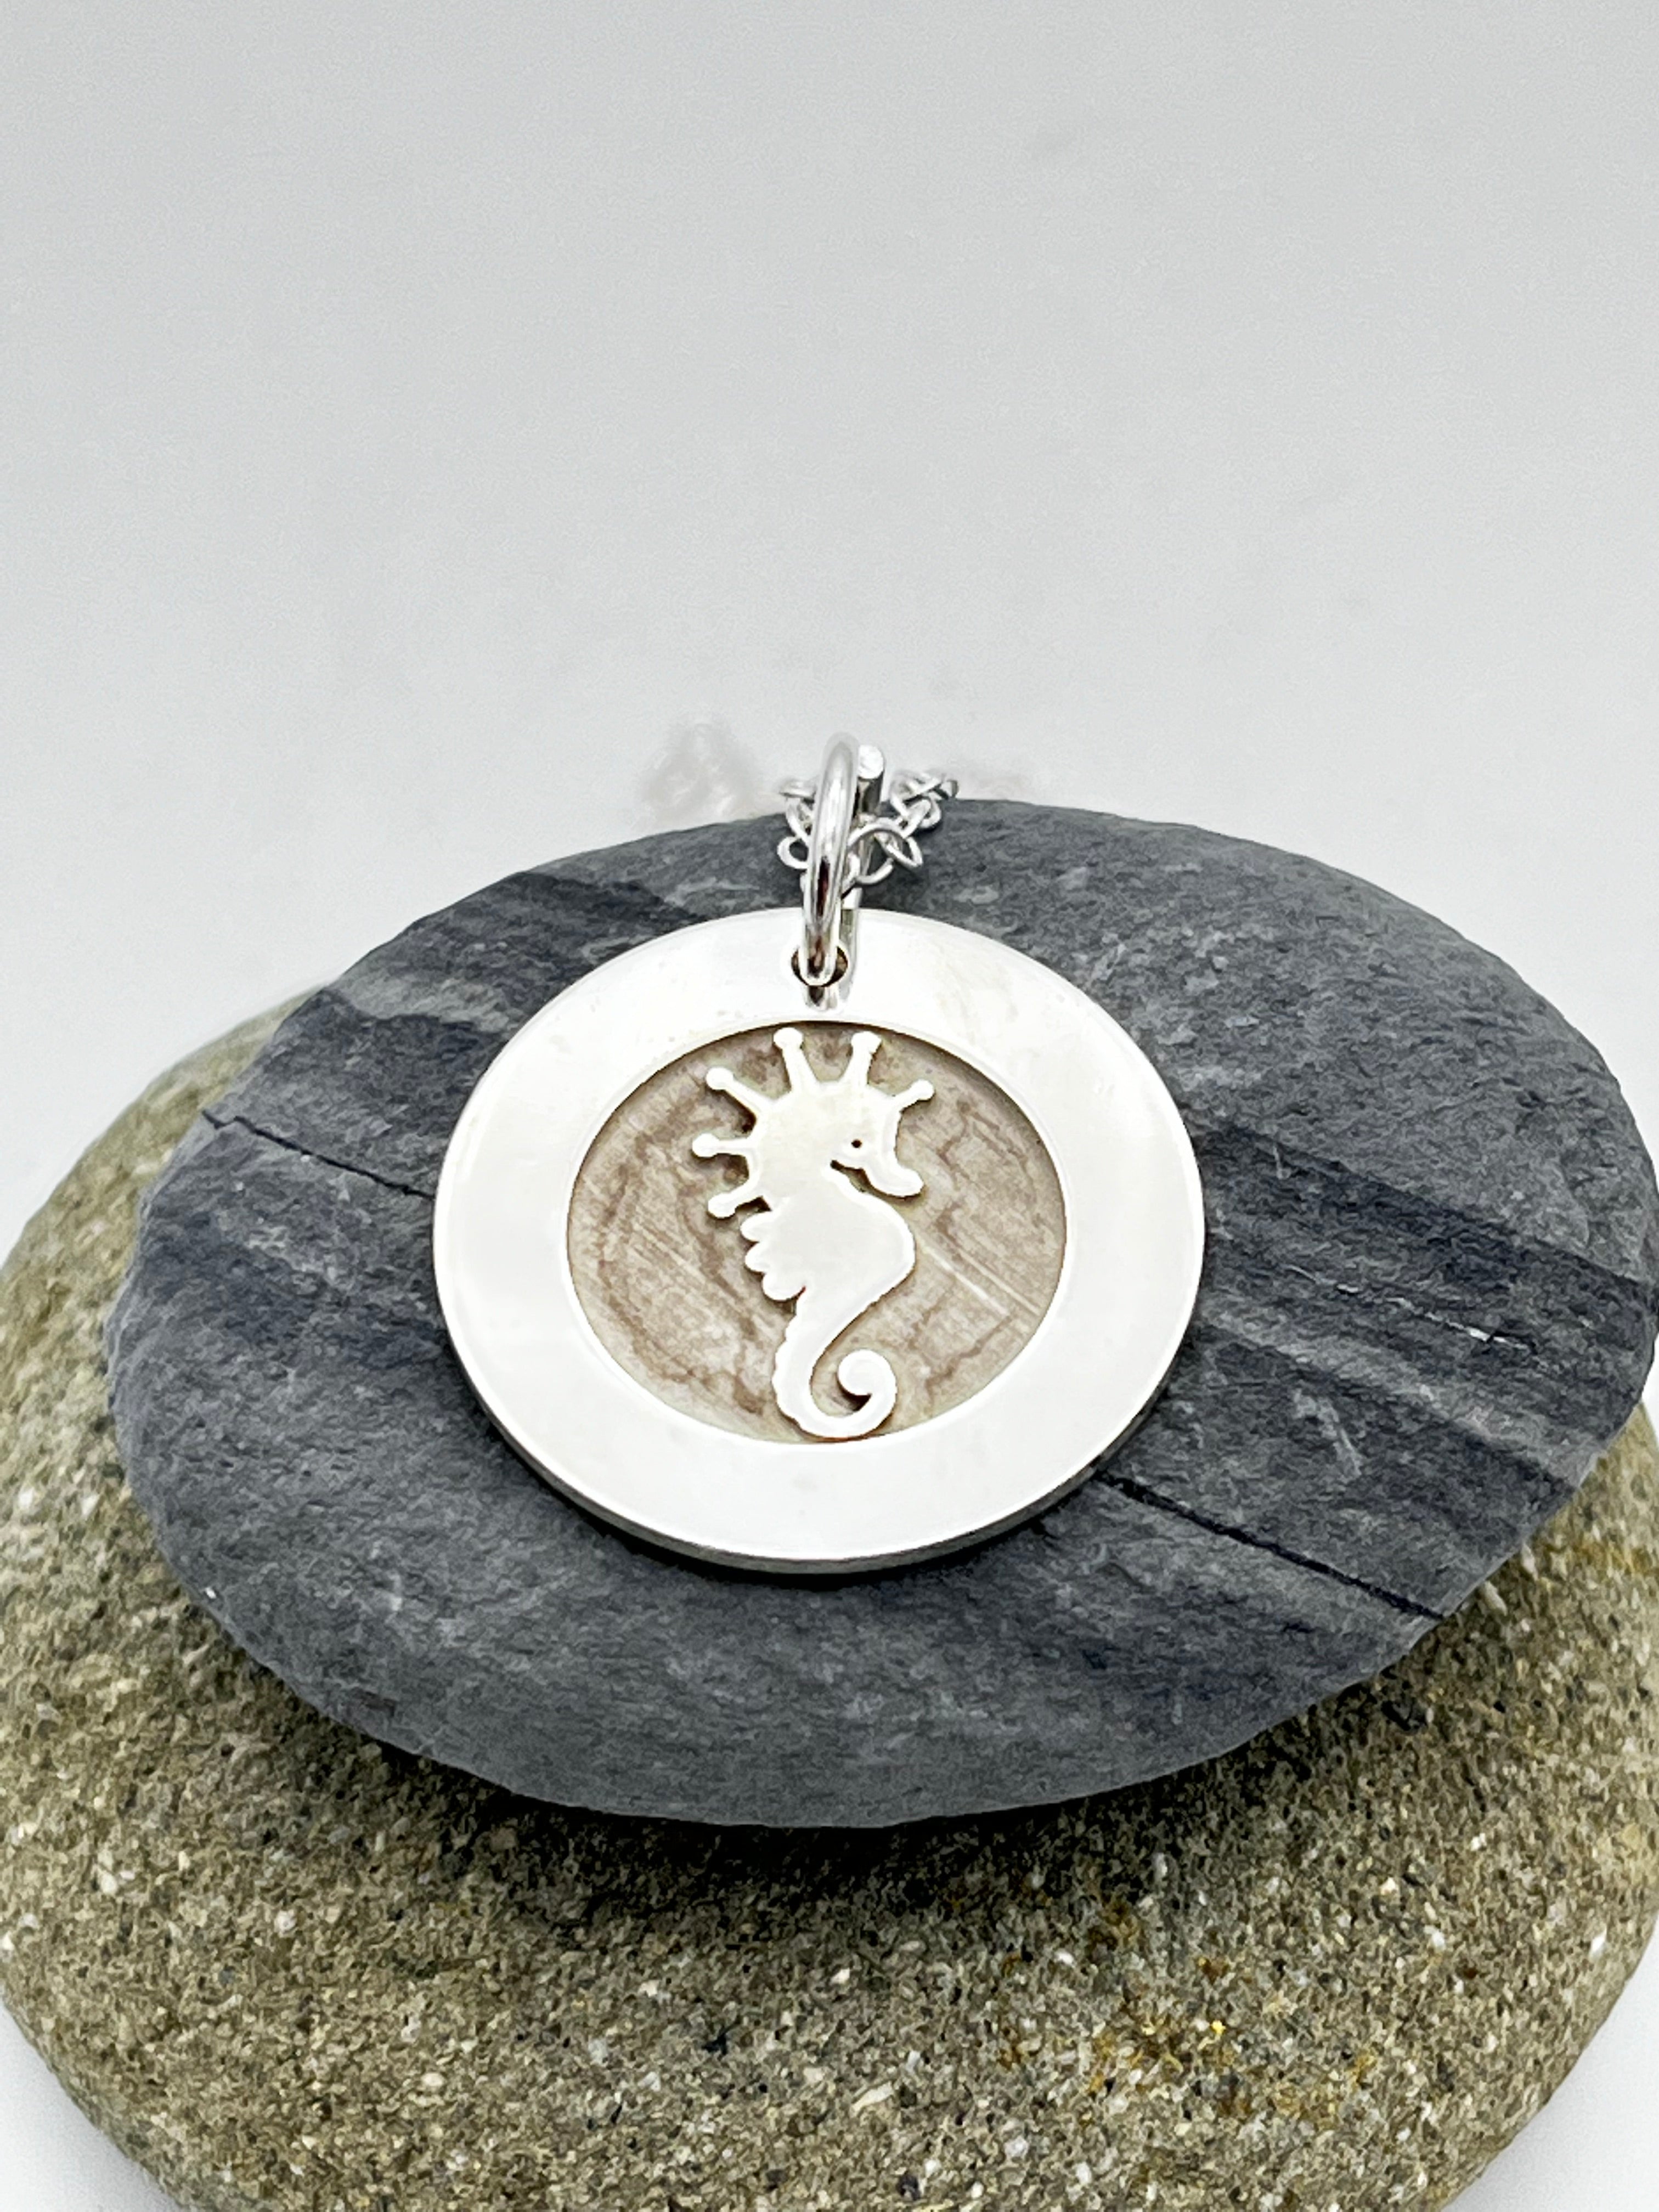 Sterling silver Seahorse pendant and 16" chain